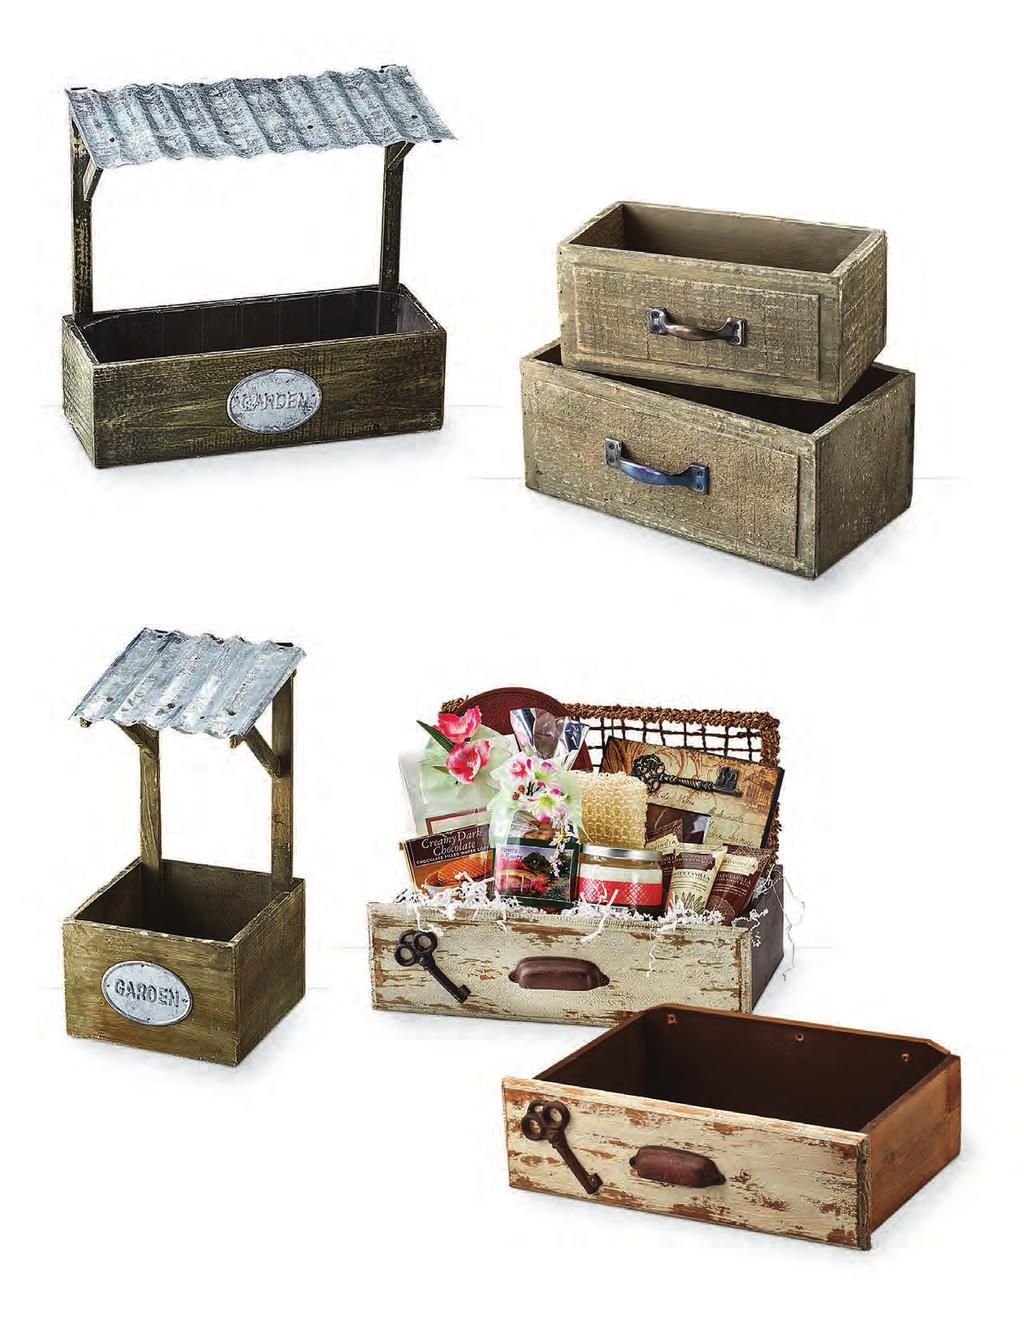 32336 Rectangular Wood Container with Metal Roof 13 x 4.75 x 3.75 Overall Height: 13.75 Plastic liner included 4/$9.99 ea. 35940 Set/2 Wooden Drawer Plastic liner included Large: 10.5 x 5.5 x 4.